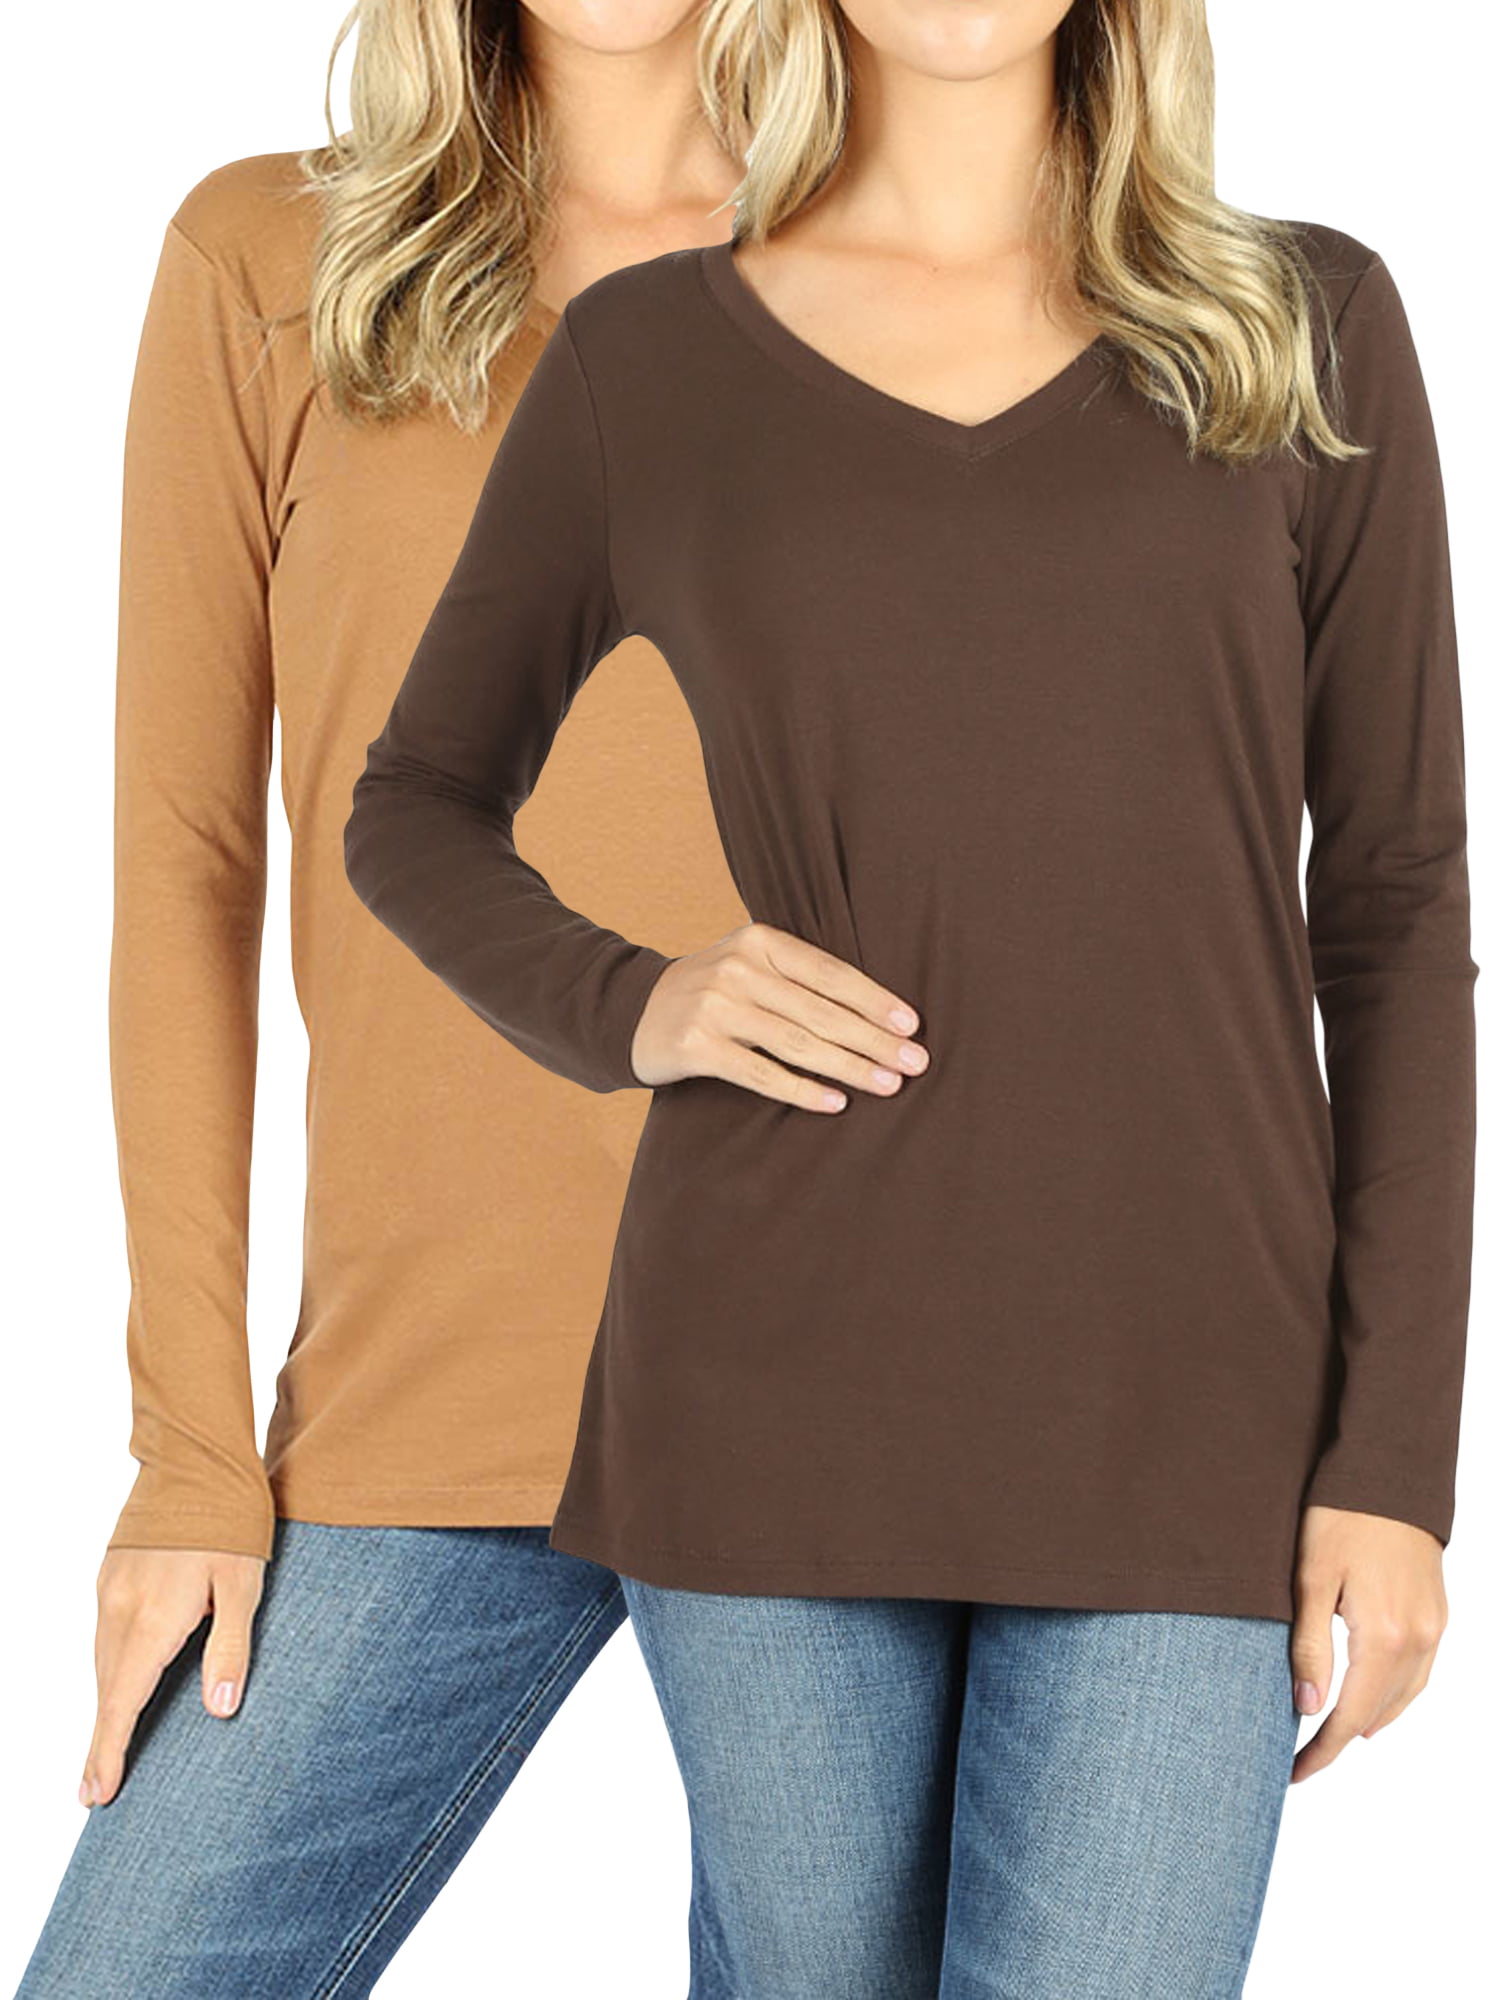 Women Casual Basic Cotton Loose Fit V Neck Long Sleeve T Shirt Top